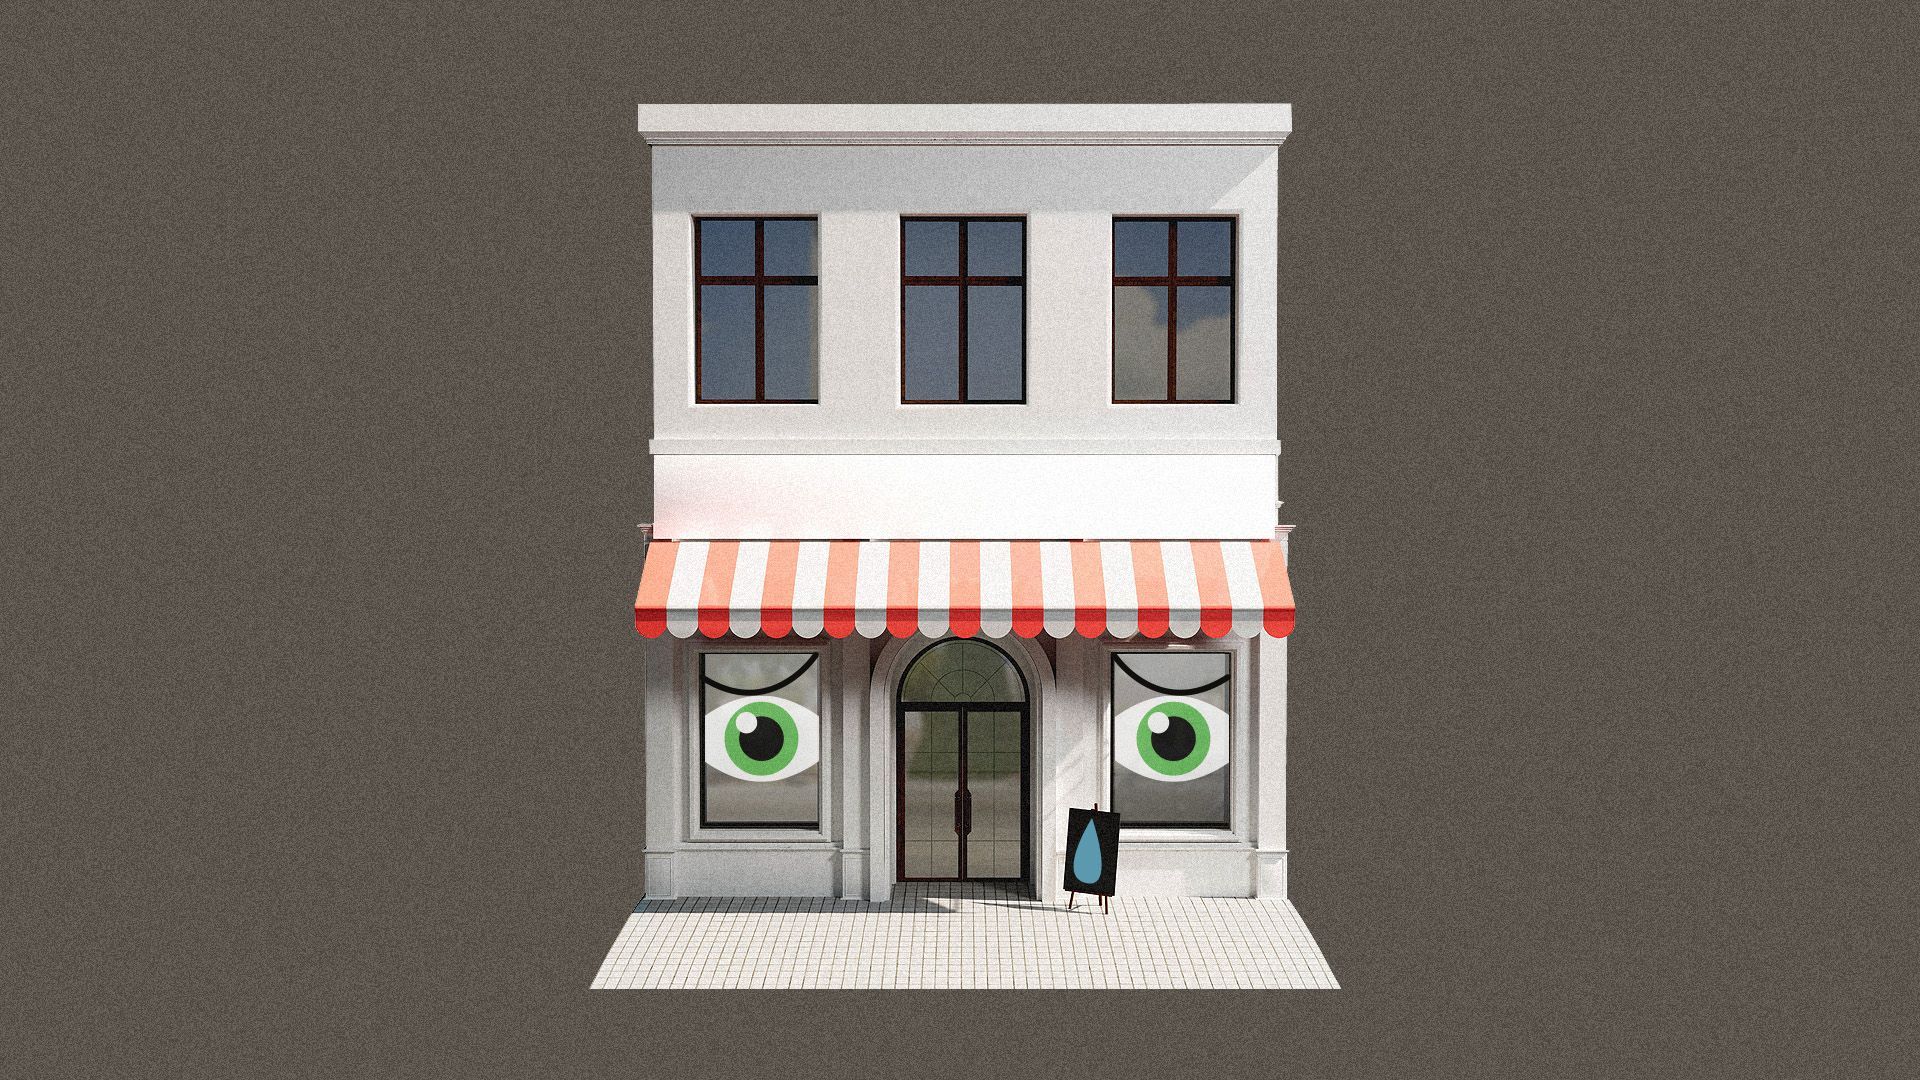 Illustration of a storefront with worried eyes in the windows